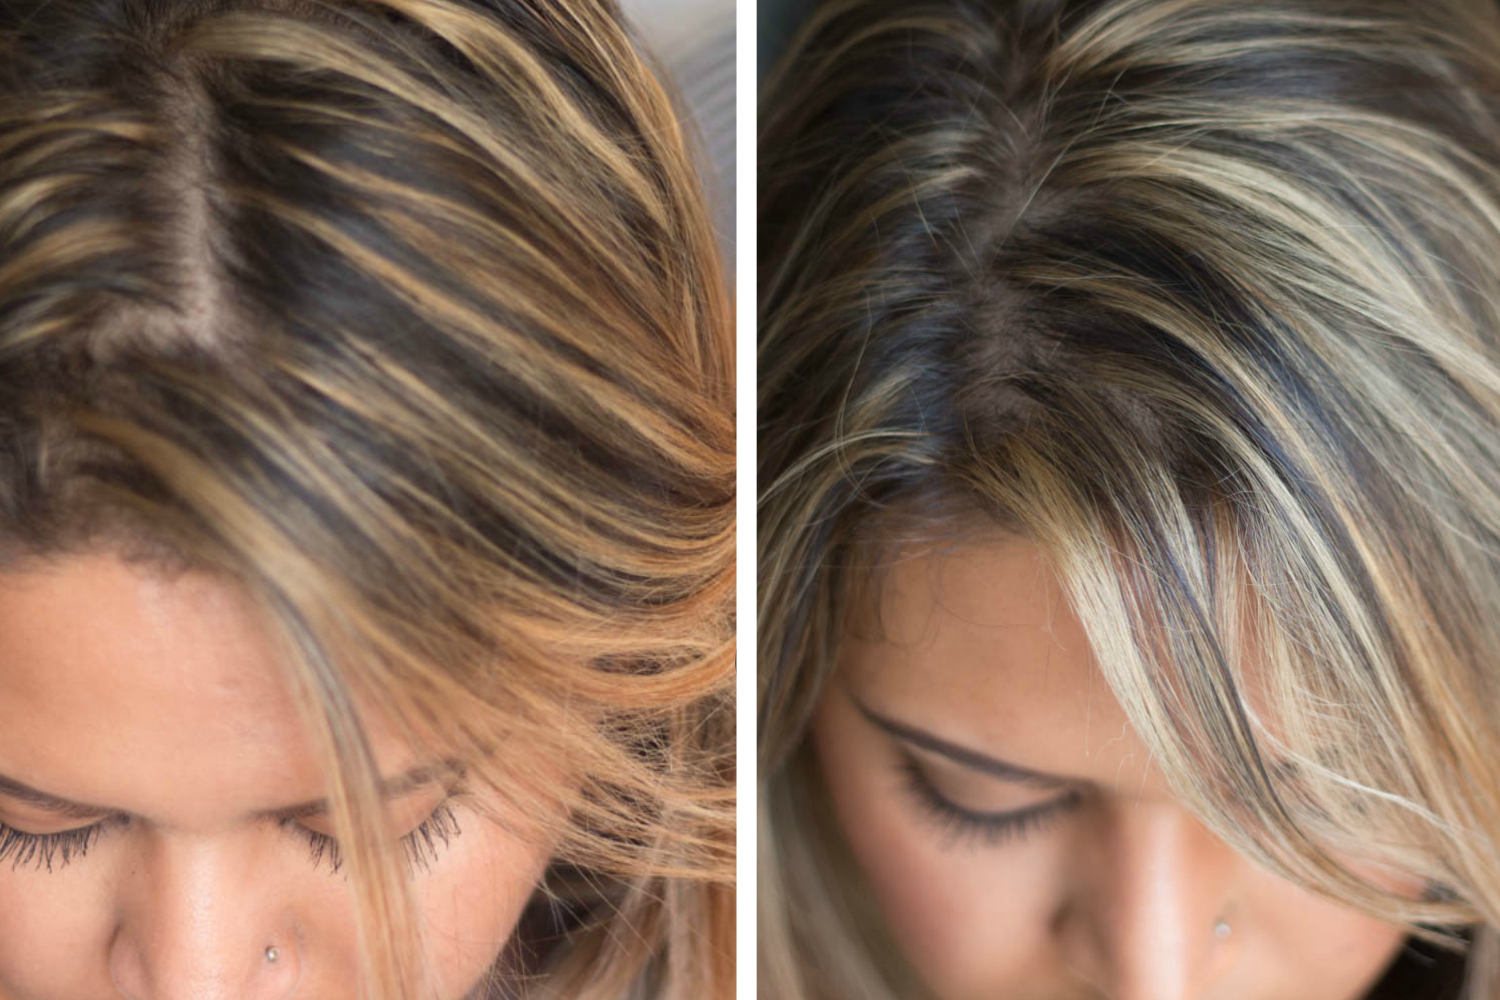 How To Tone Brassy Hair At Home Wella T14 And Wella T18 XoXo